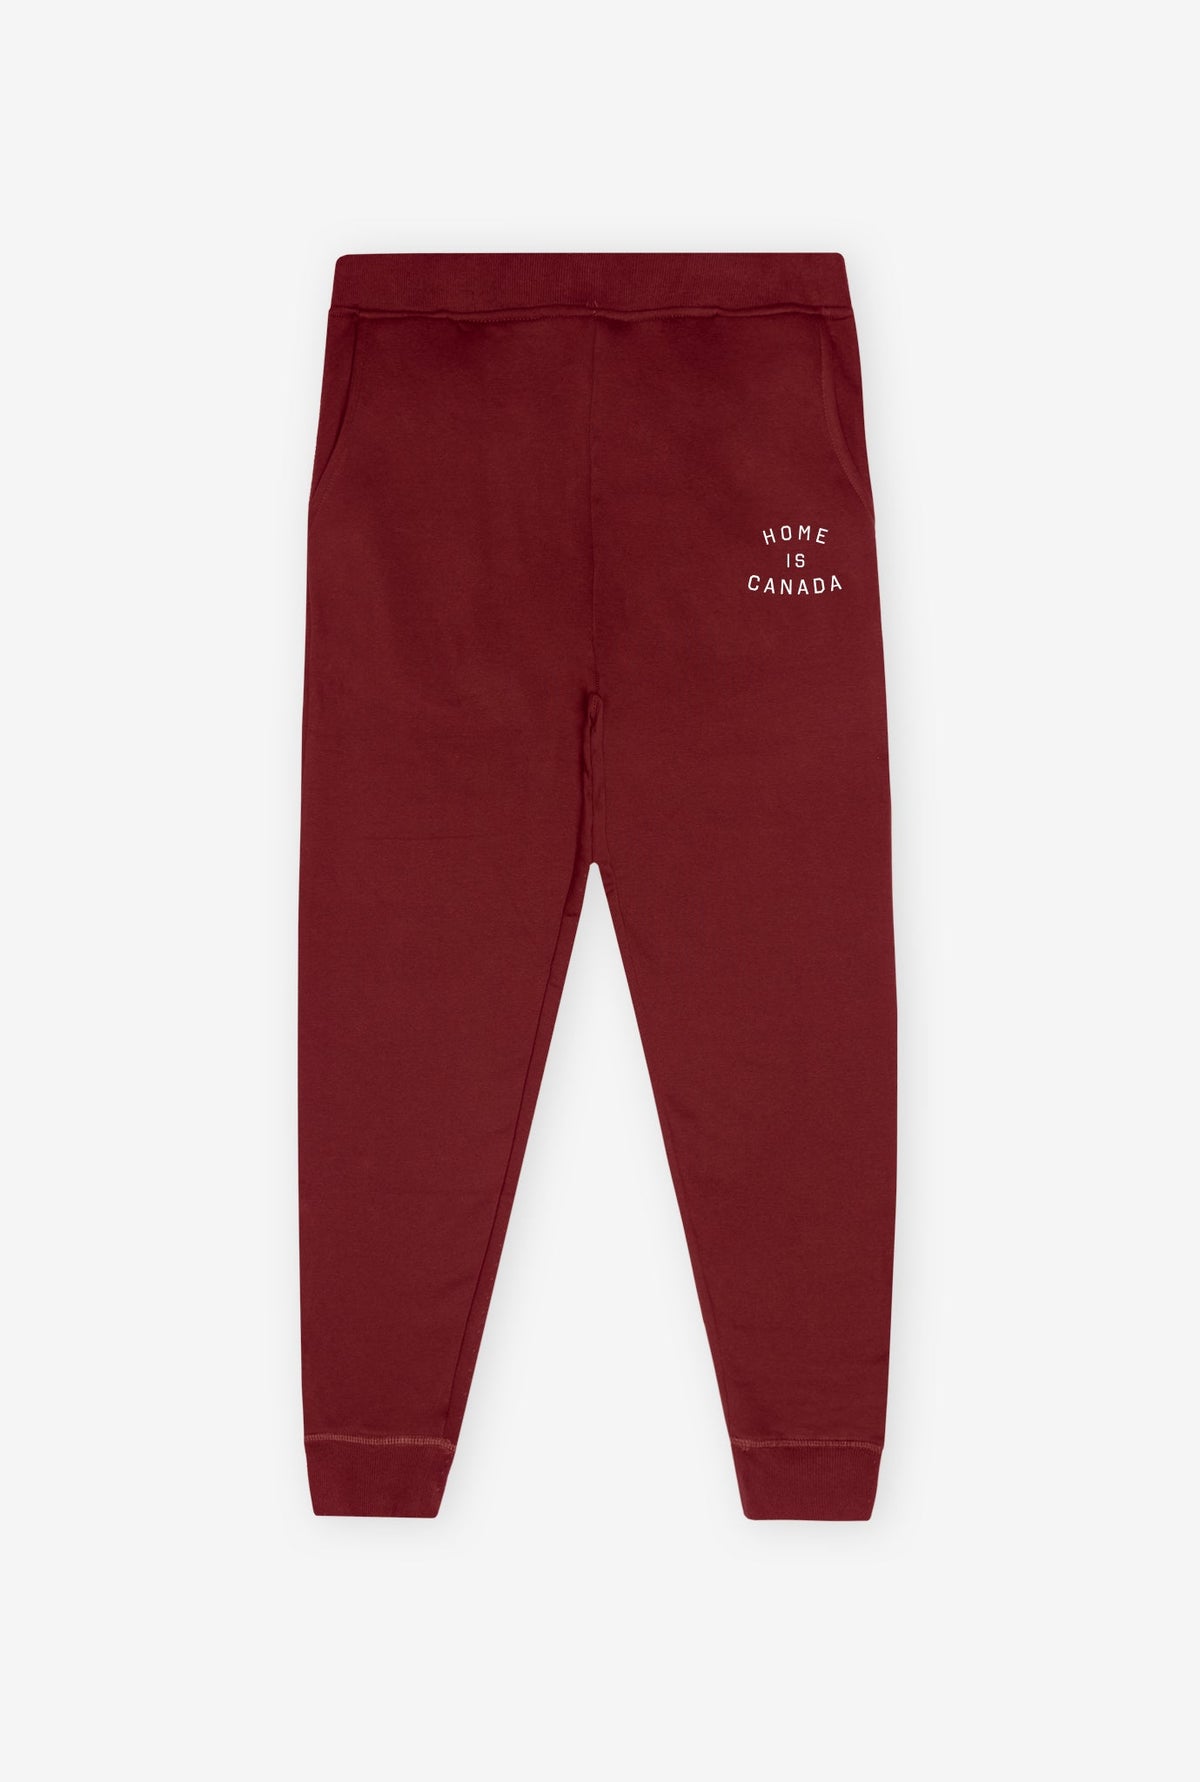 Home is Canada Jogger - Maroon